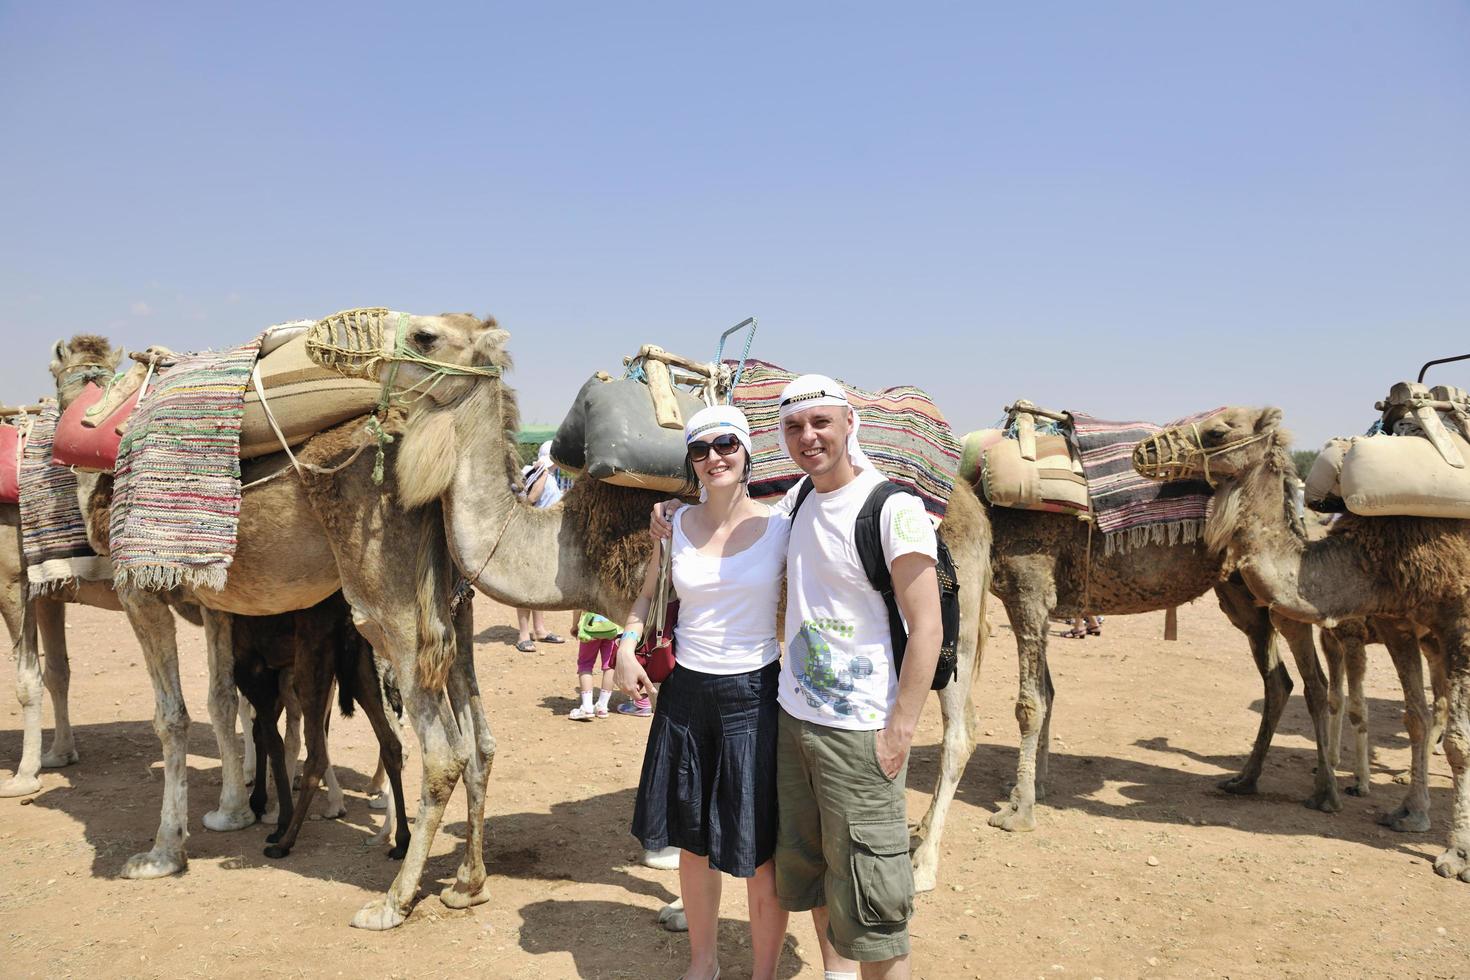 Posing with camels photo